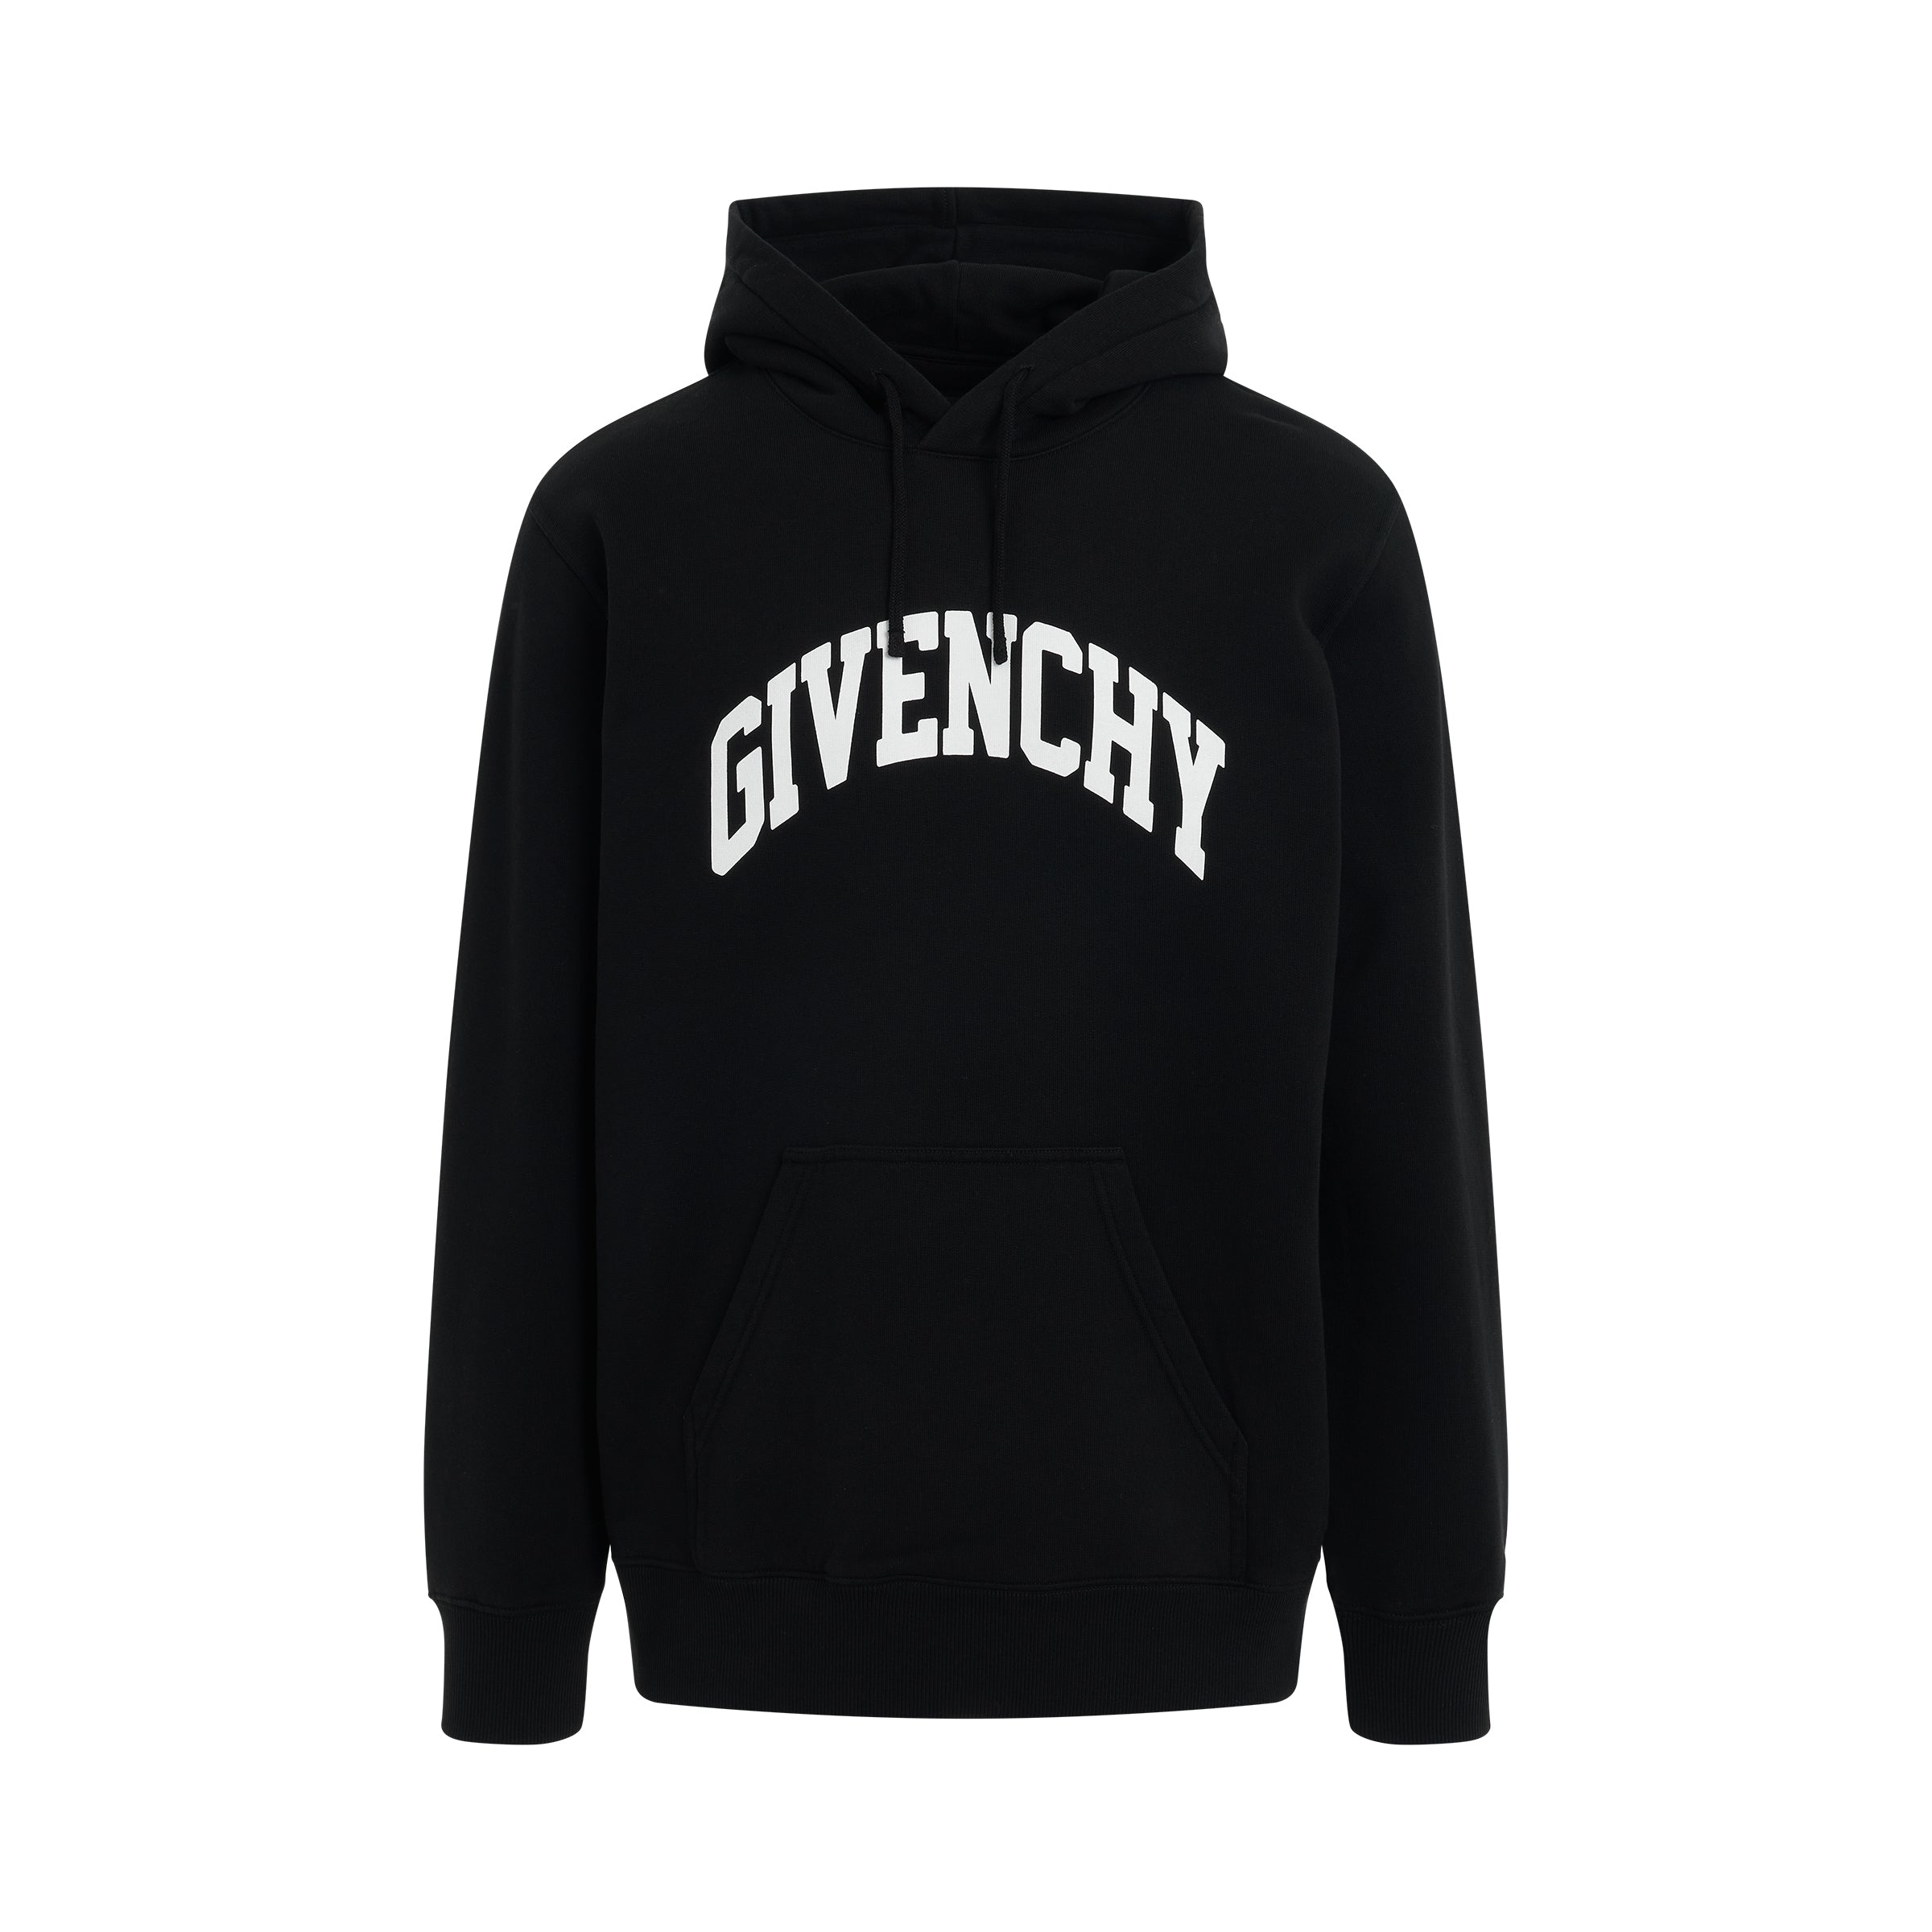 givenchy archetype college logo hoodie in black sold out sold out sale ...